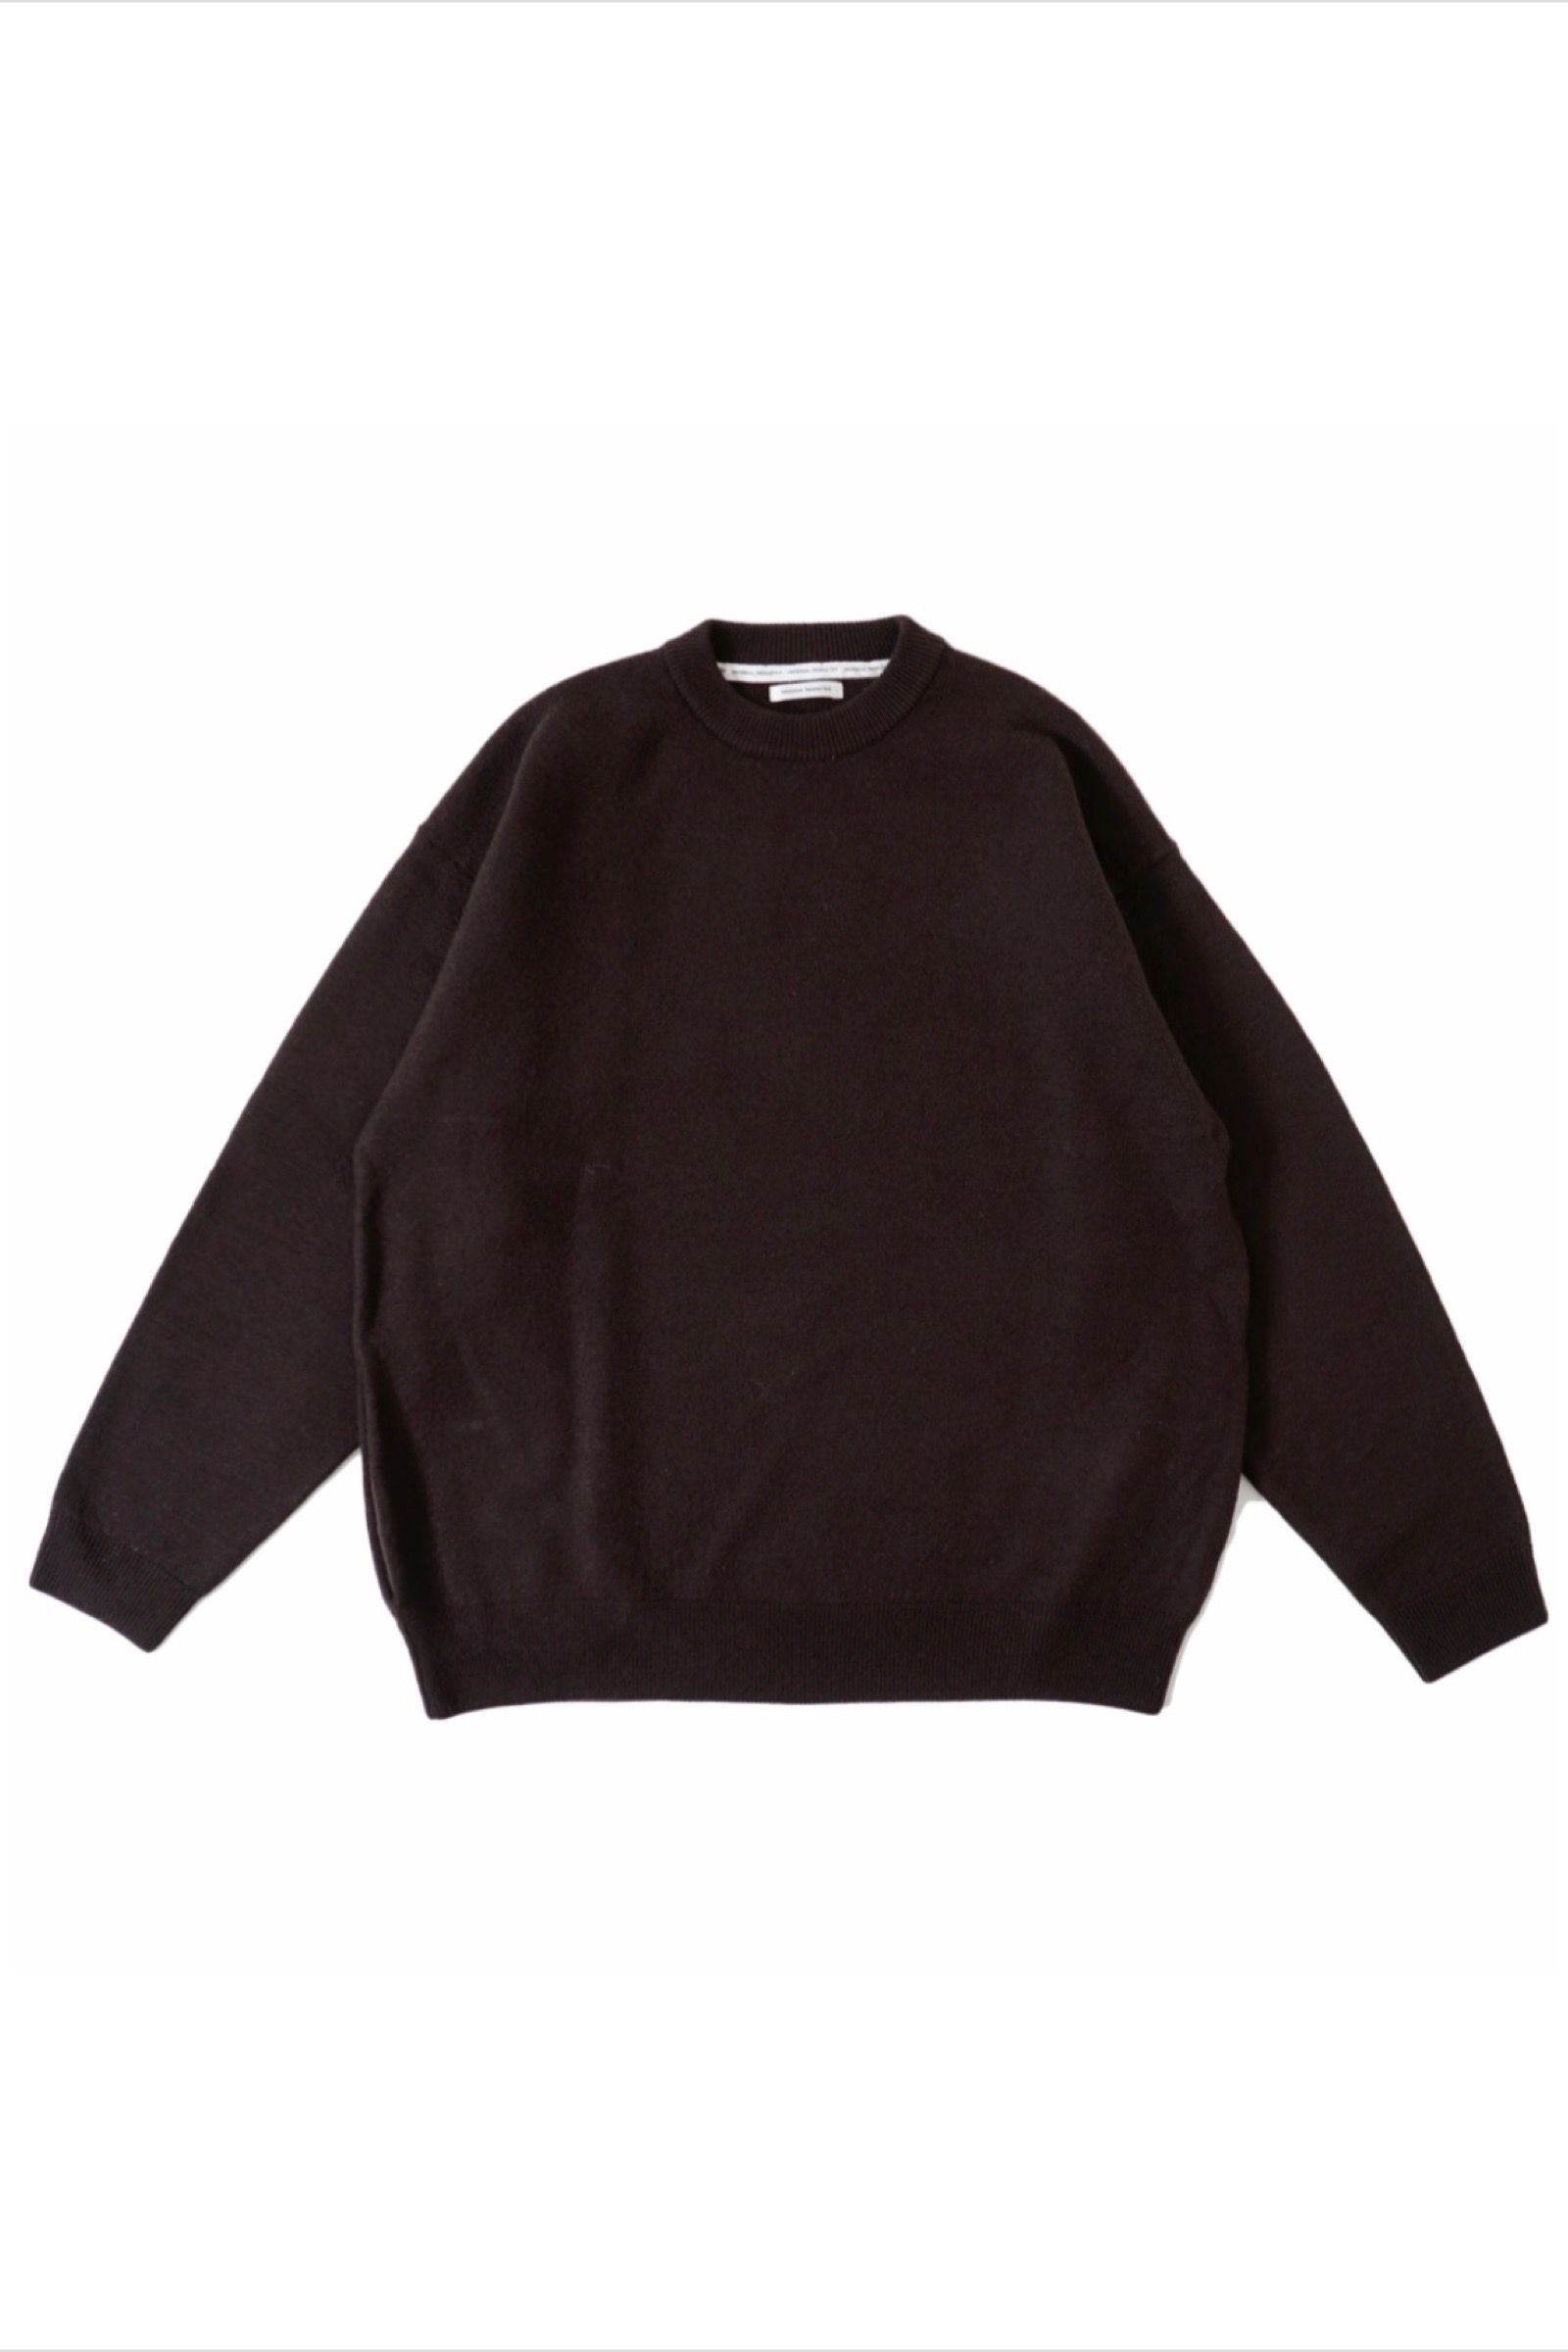 UNIVERSAL PRODUCTS - felted merino wool crew neck knit -brown